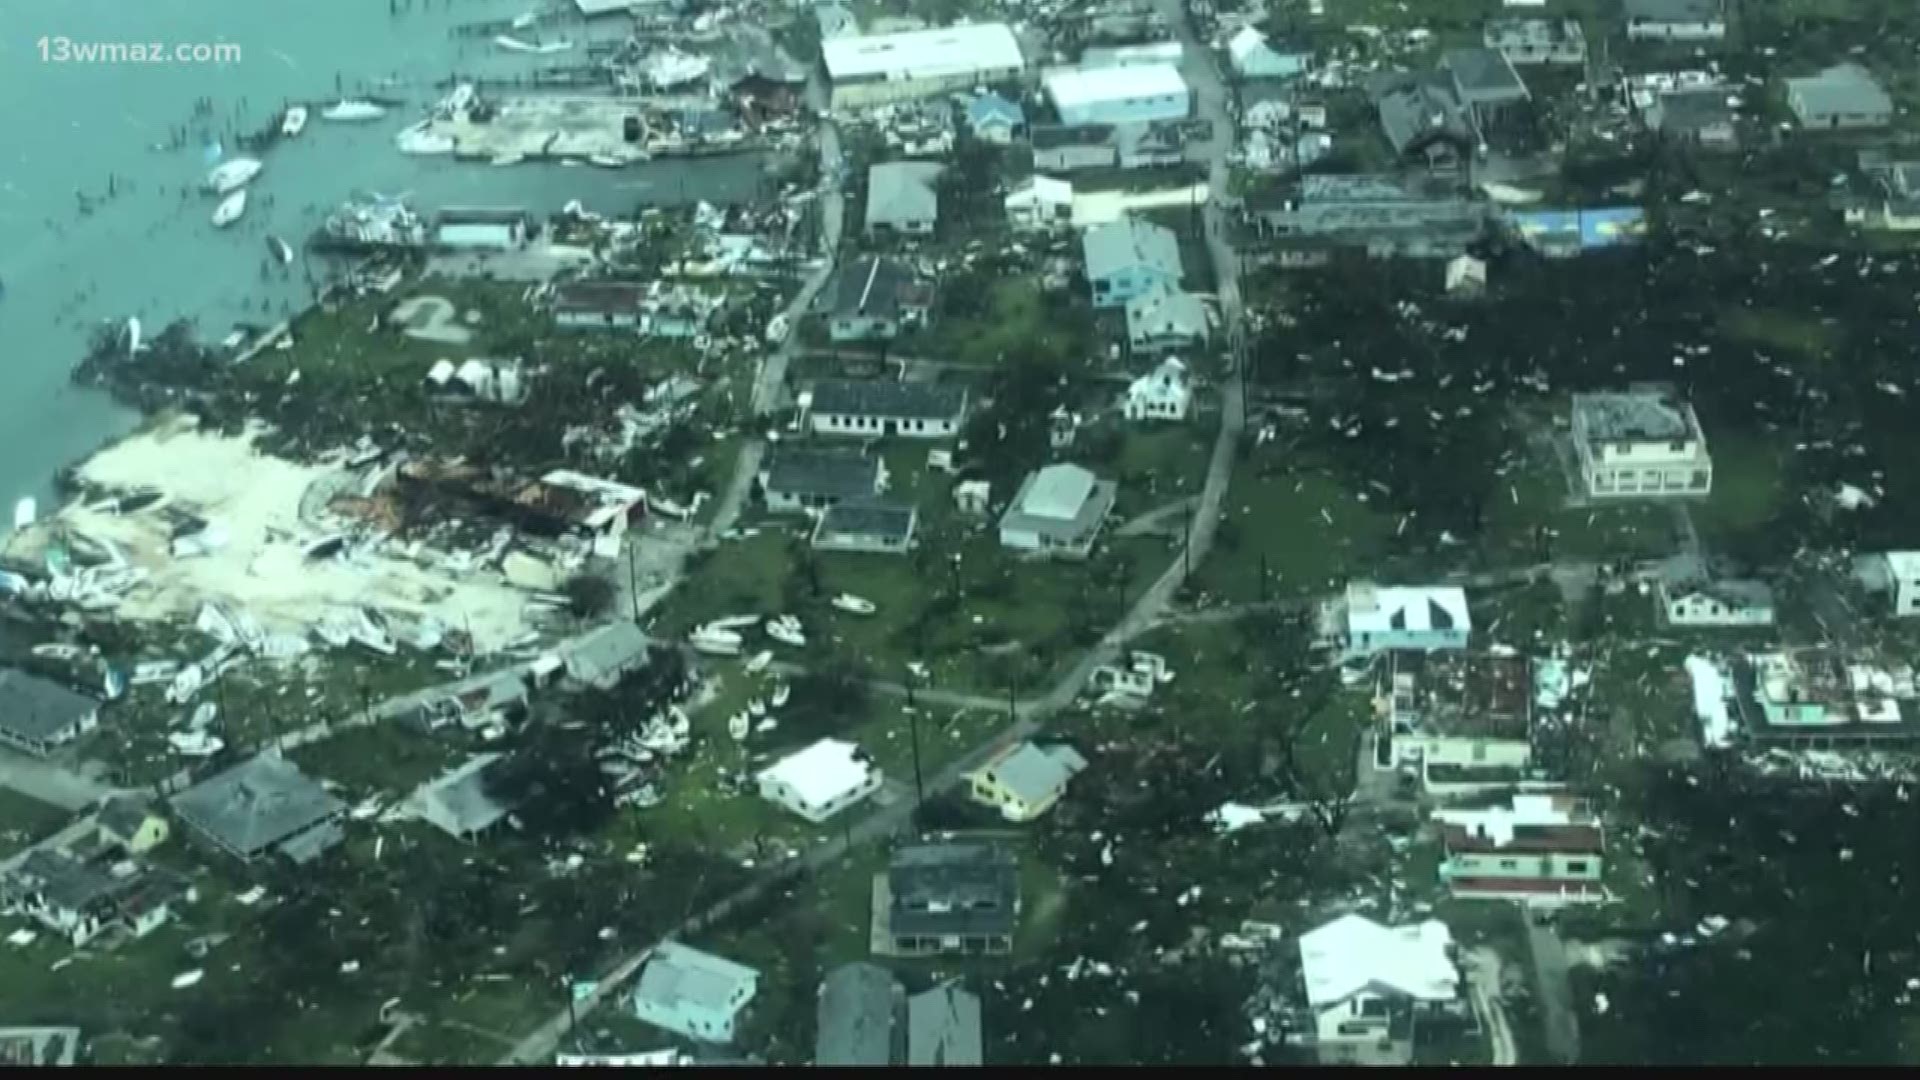 Now that Hurricane Dorian has moved past Georgia, many people from the coast are back home, and focus is shifting towards recovery efforts and cleanup in the United States and Bahamas.